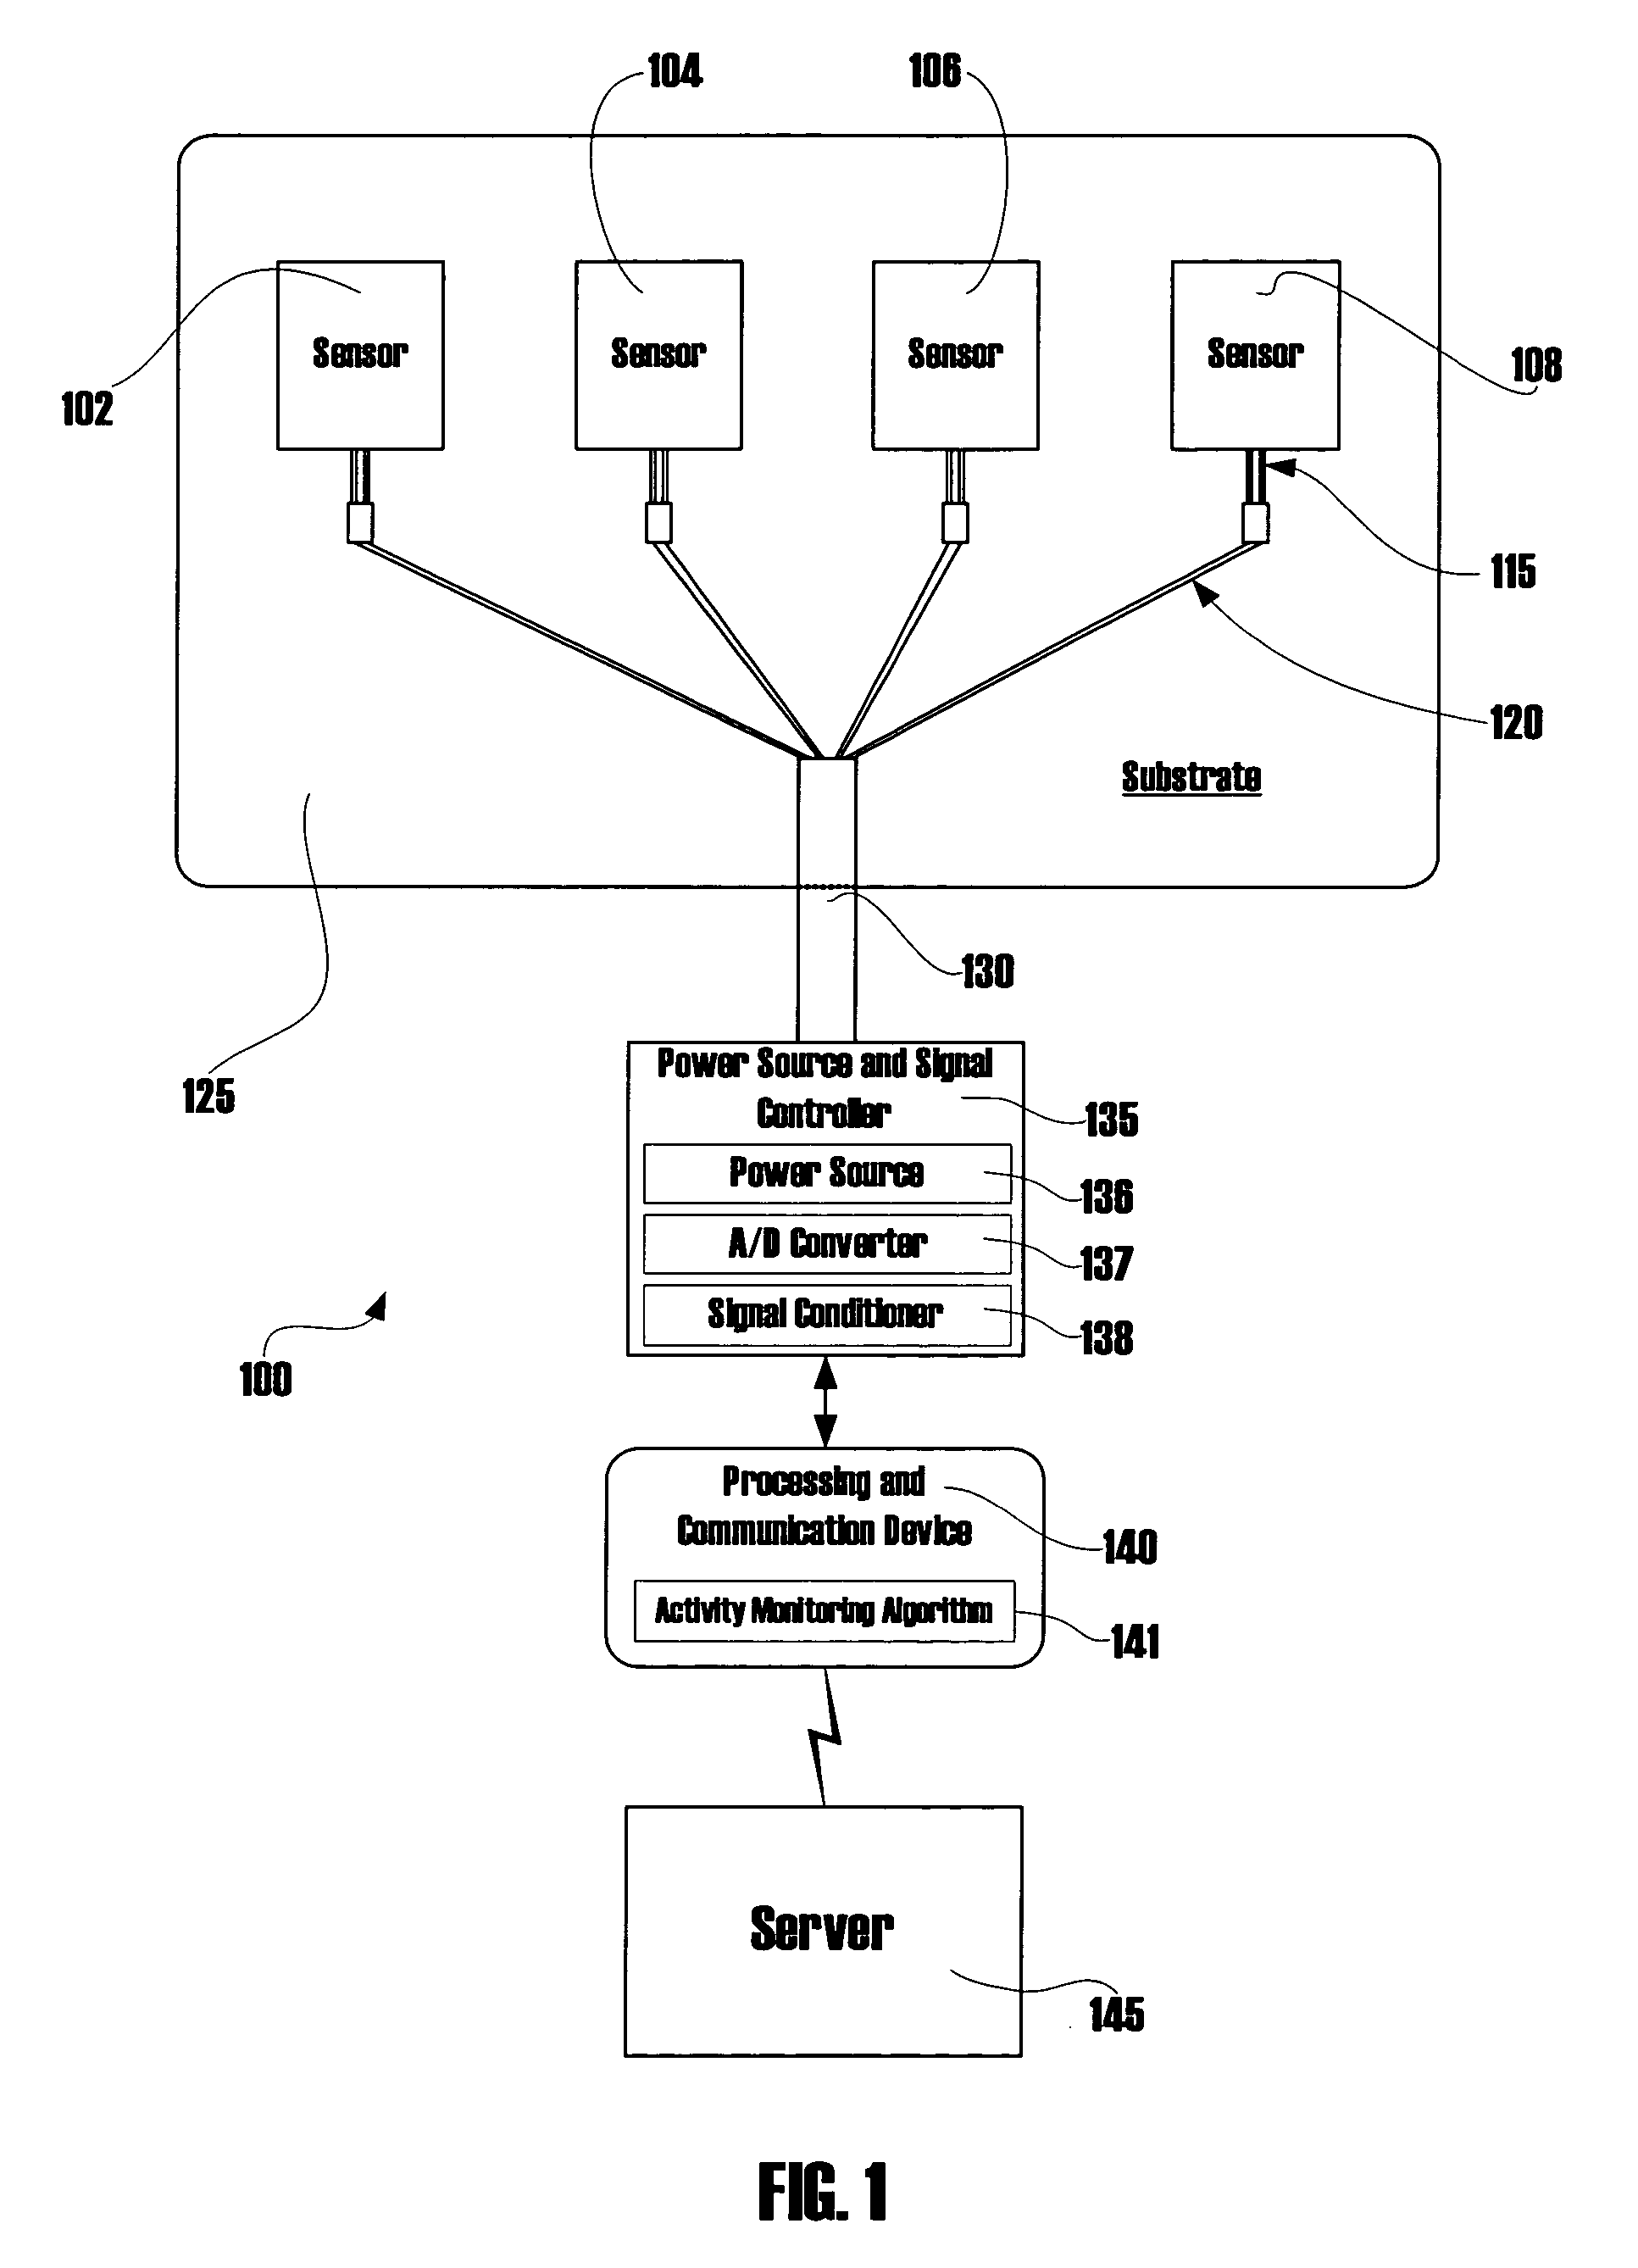 Systems and methods for mobile activity monitoring